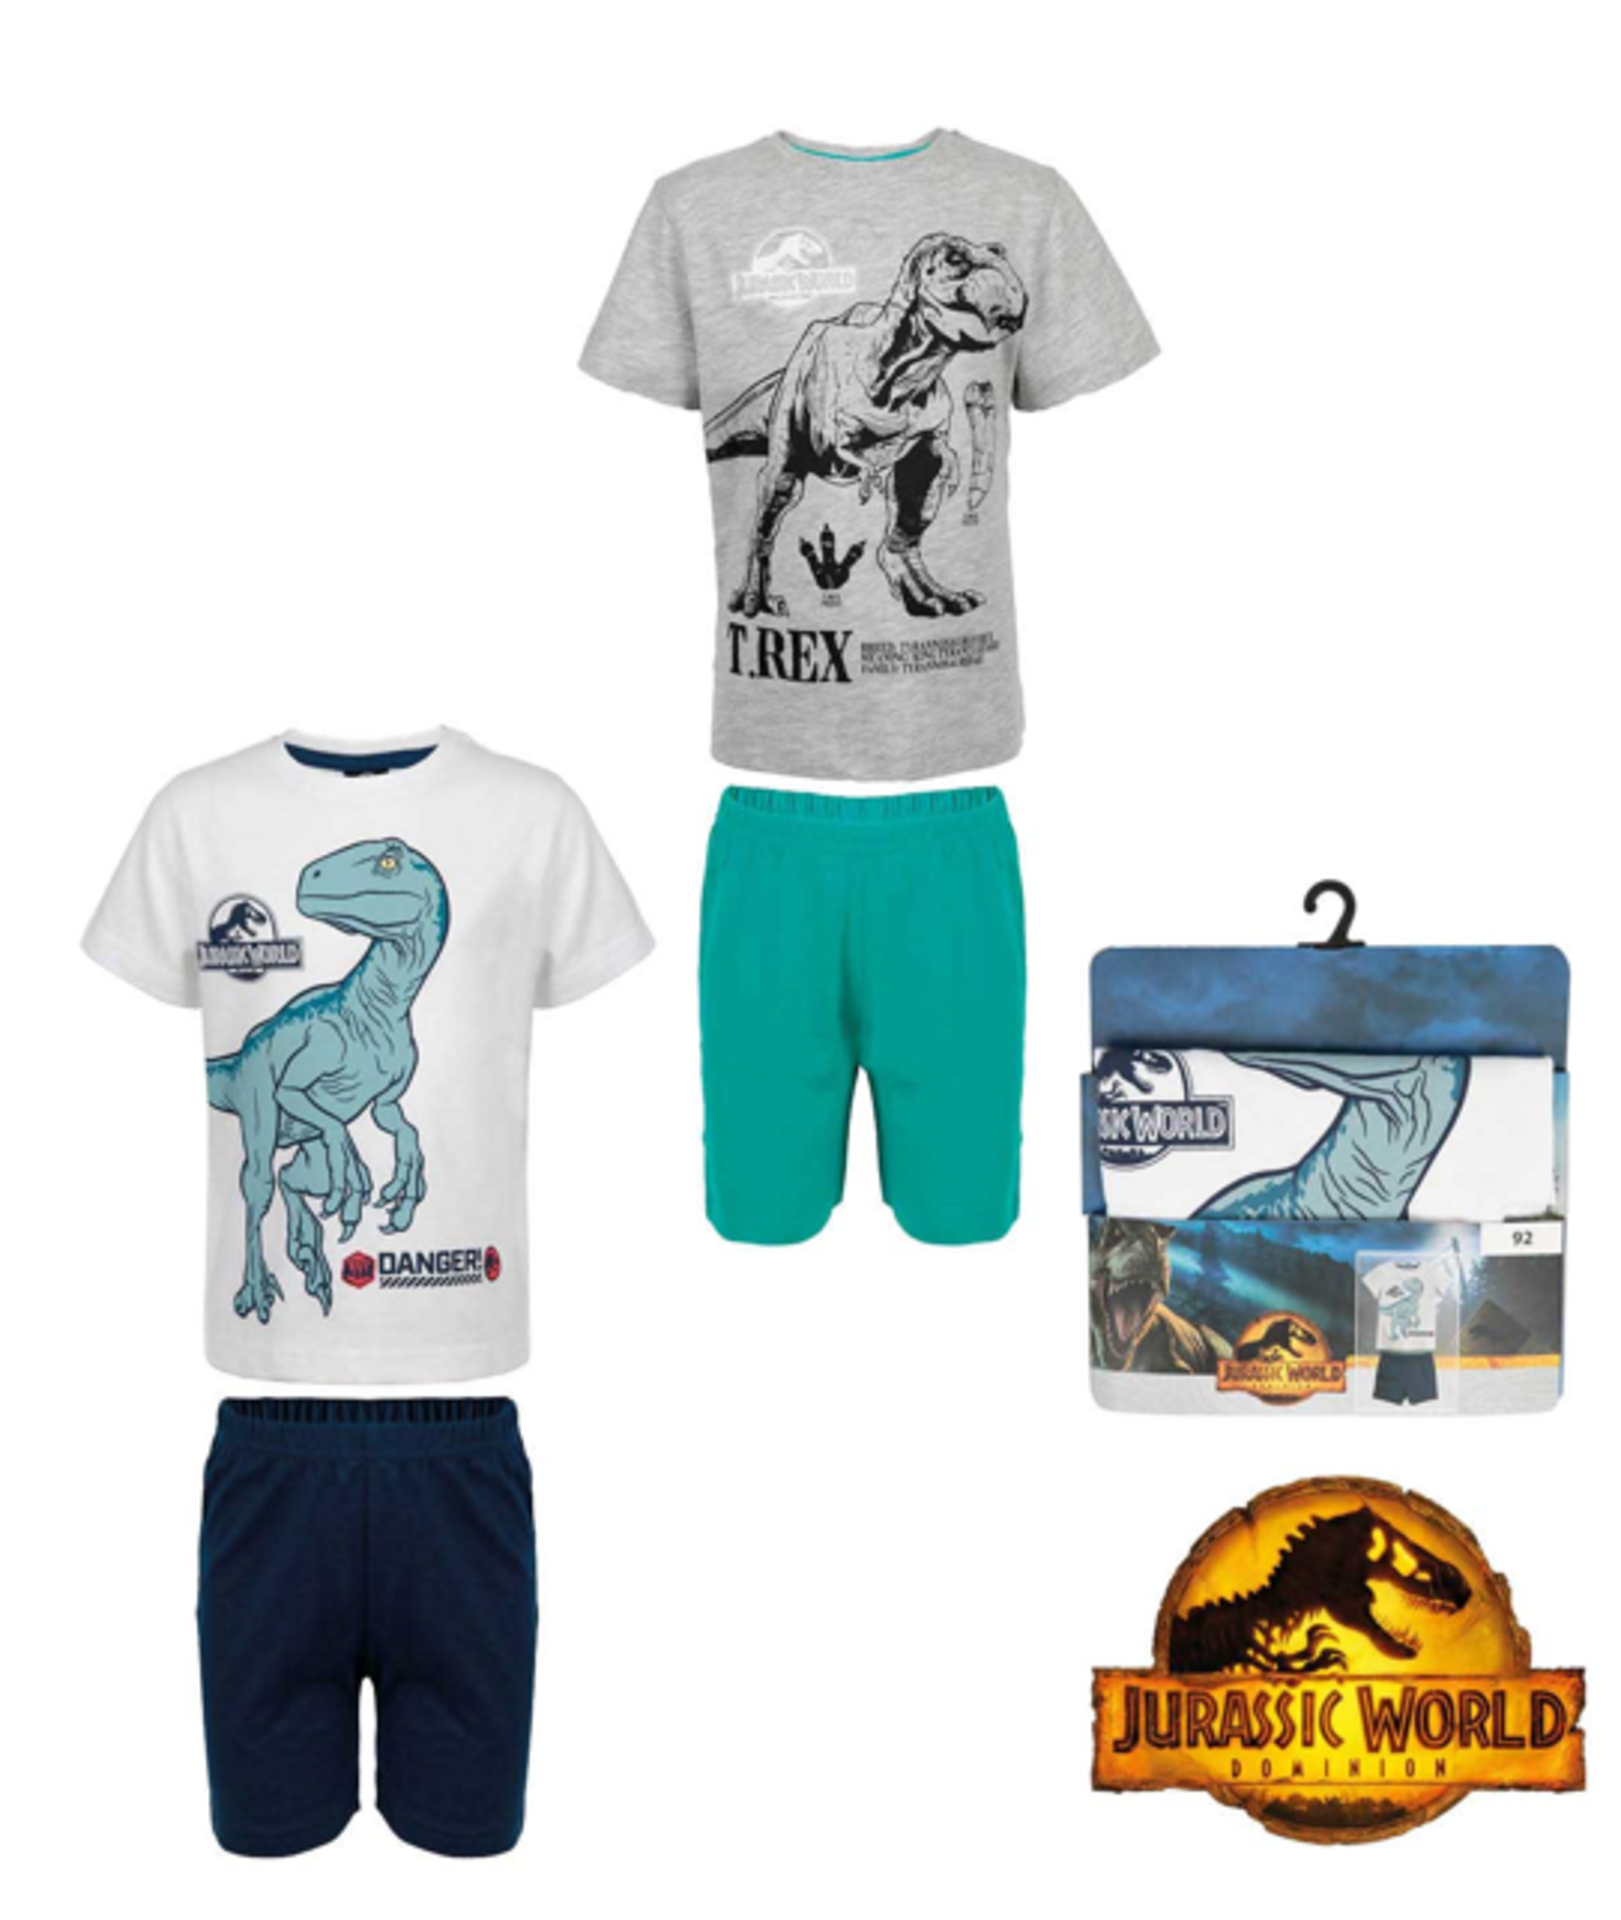 TRADE LOT 144 x New & Packaged Official Licenced Jurassic World Dominion Pajamas. In 2 Assorted - Image 2 of 2